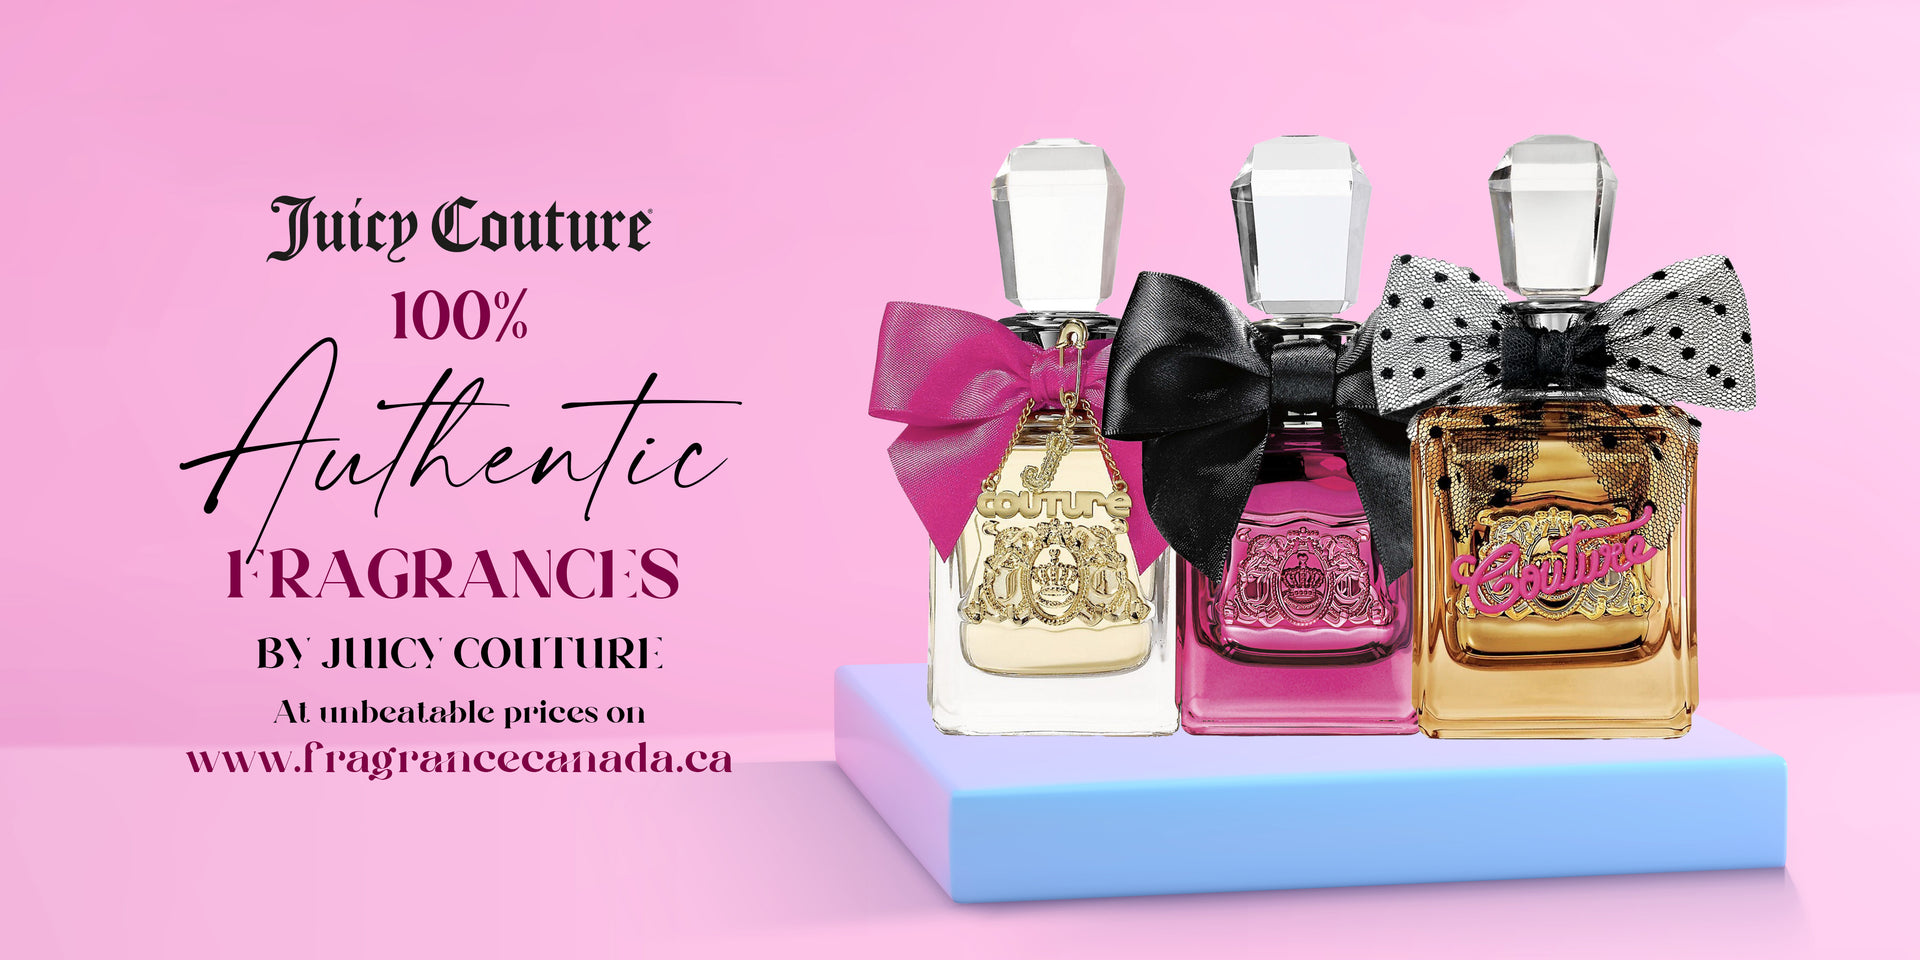 Juicy Couture Perfumes & Colognes for Men & Women